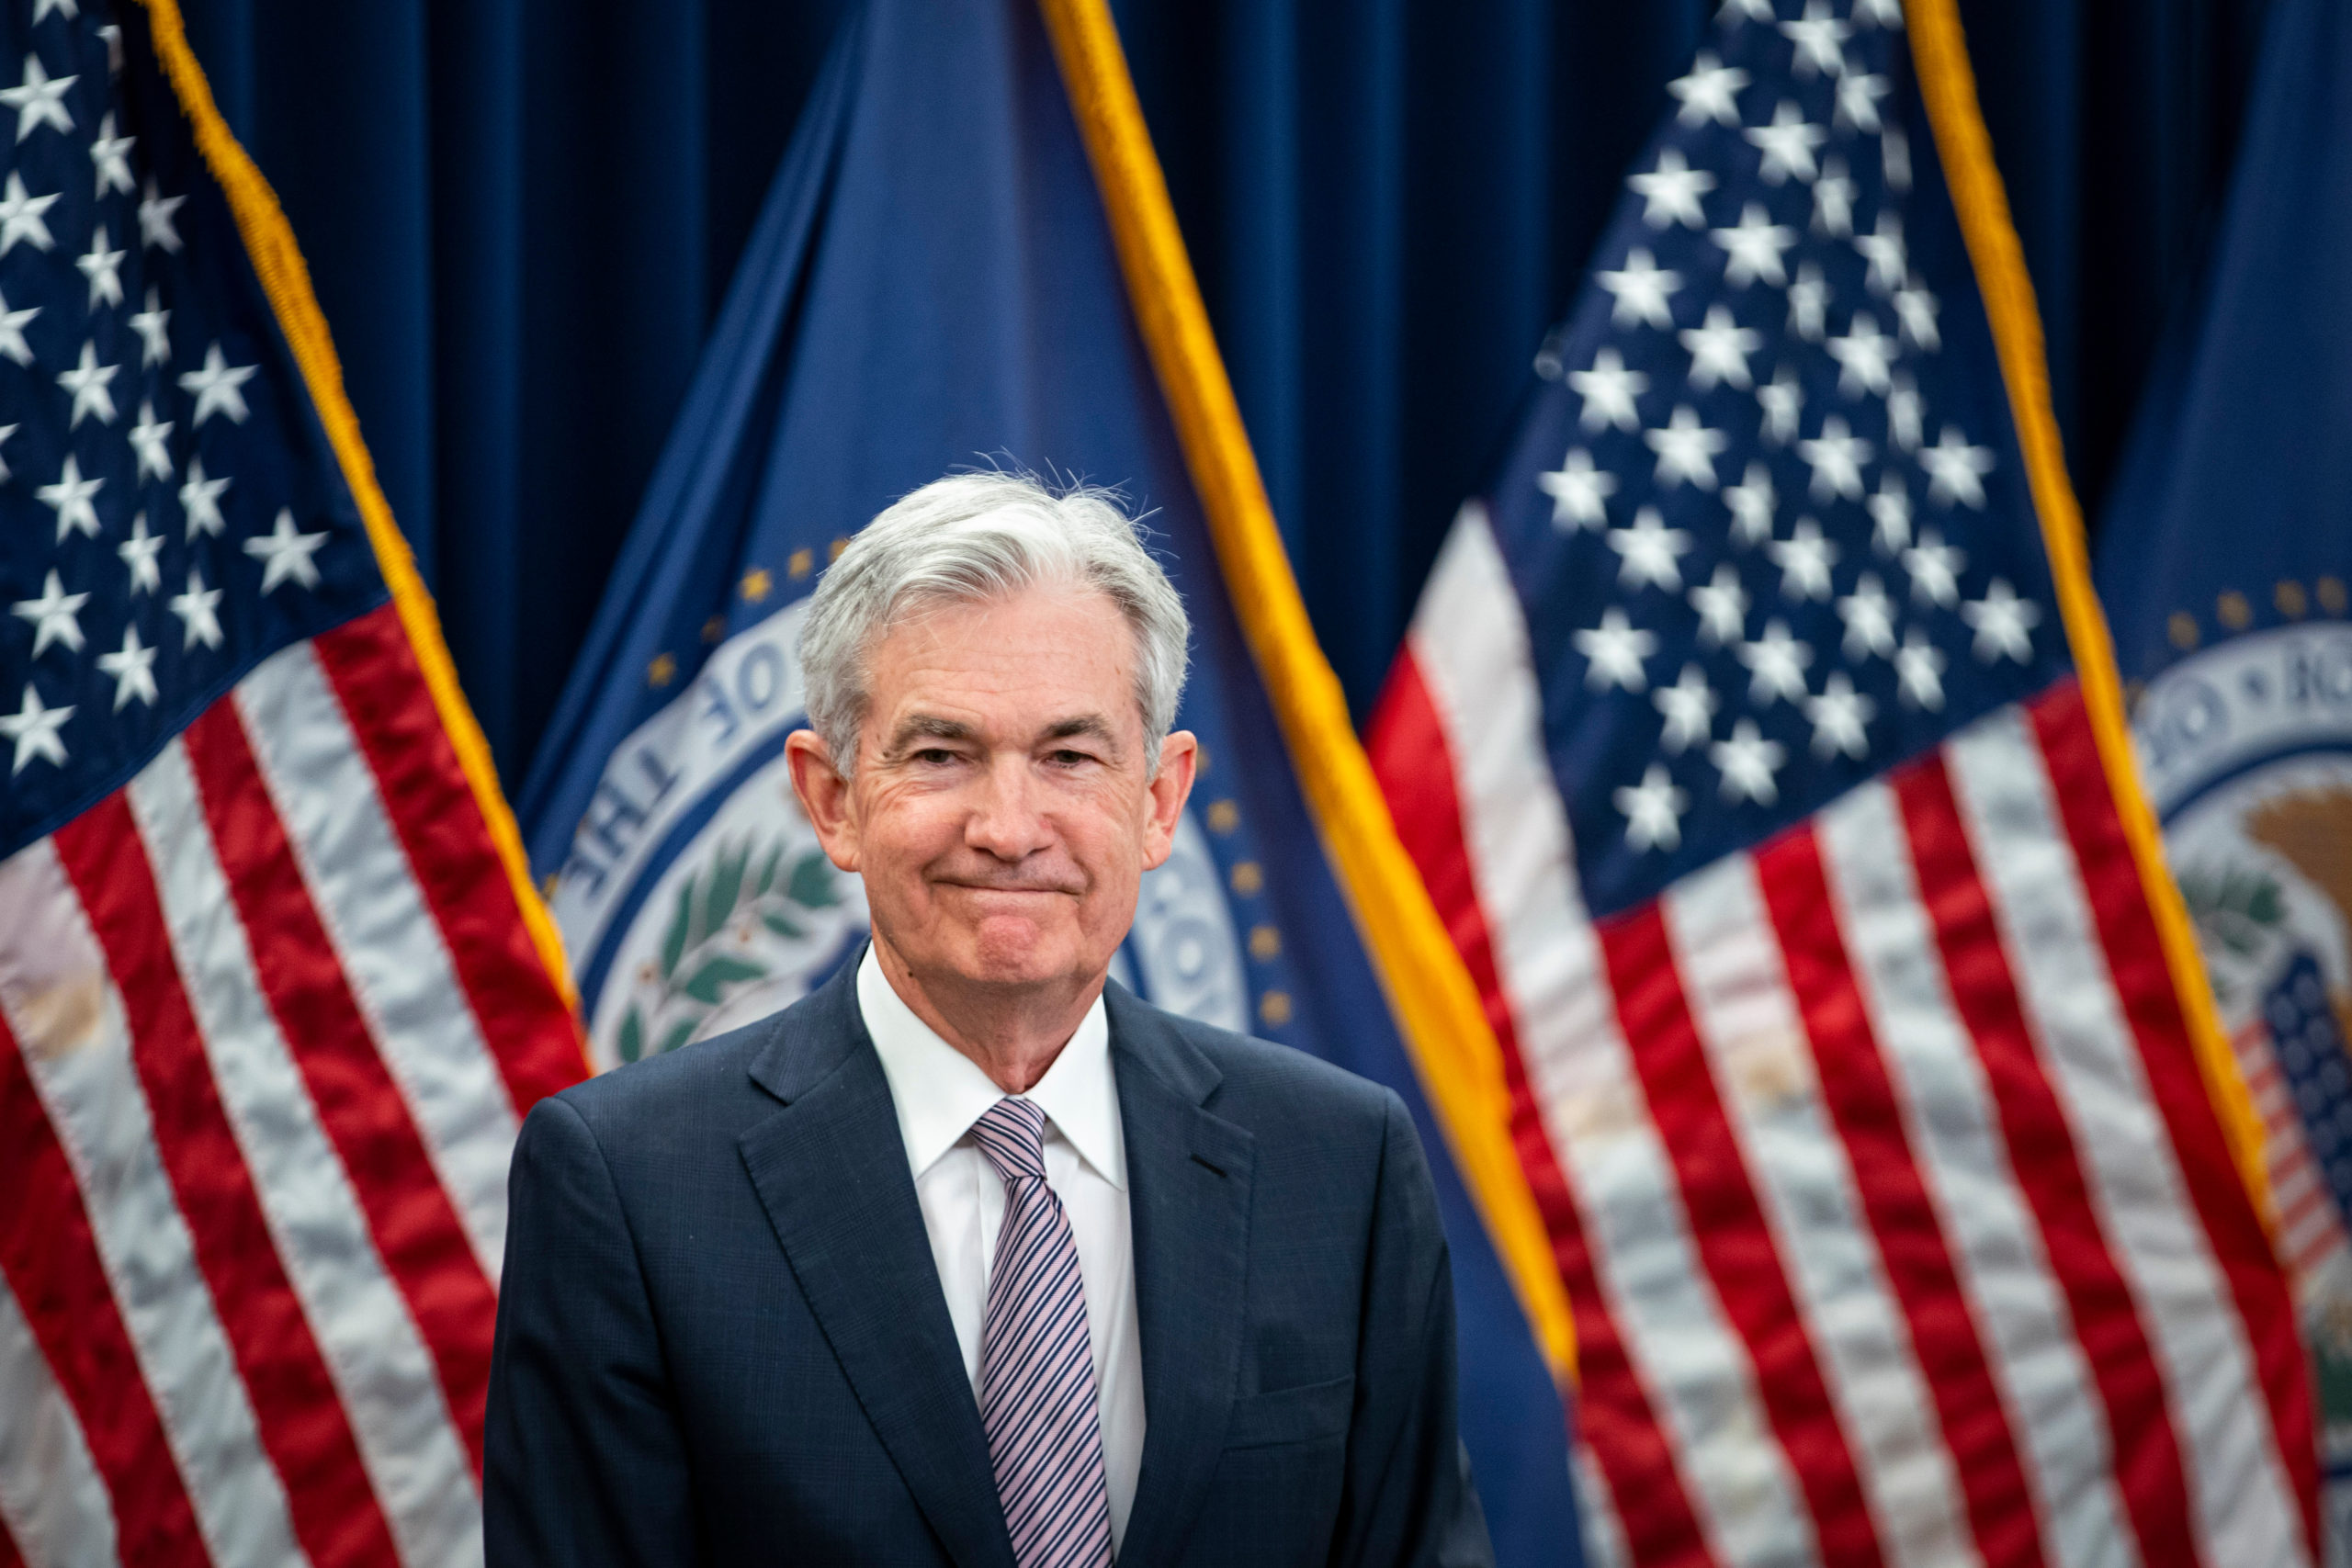 Fed is likely to consider a 75 basis-point interest rate hike, the biggest since 1994